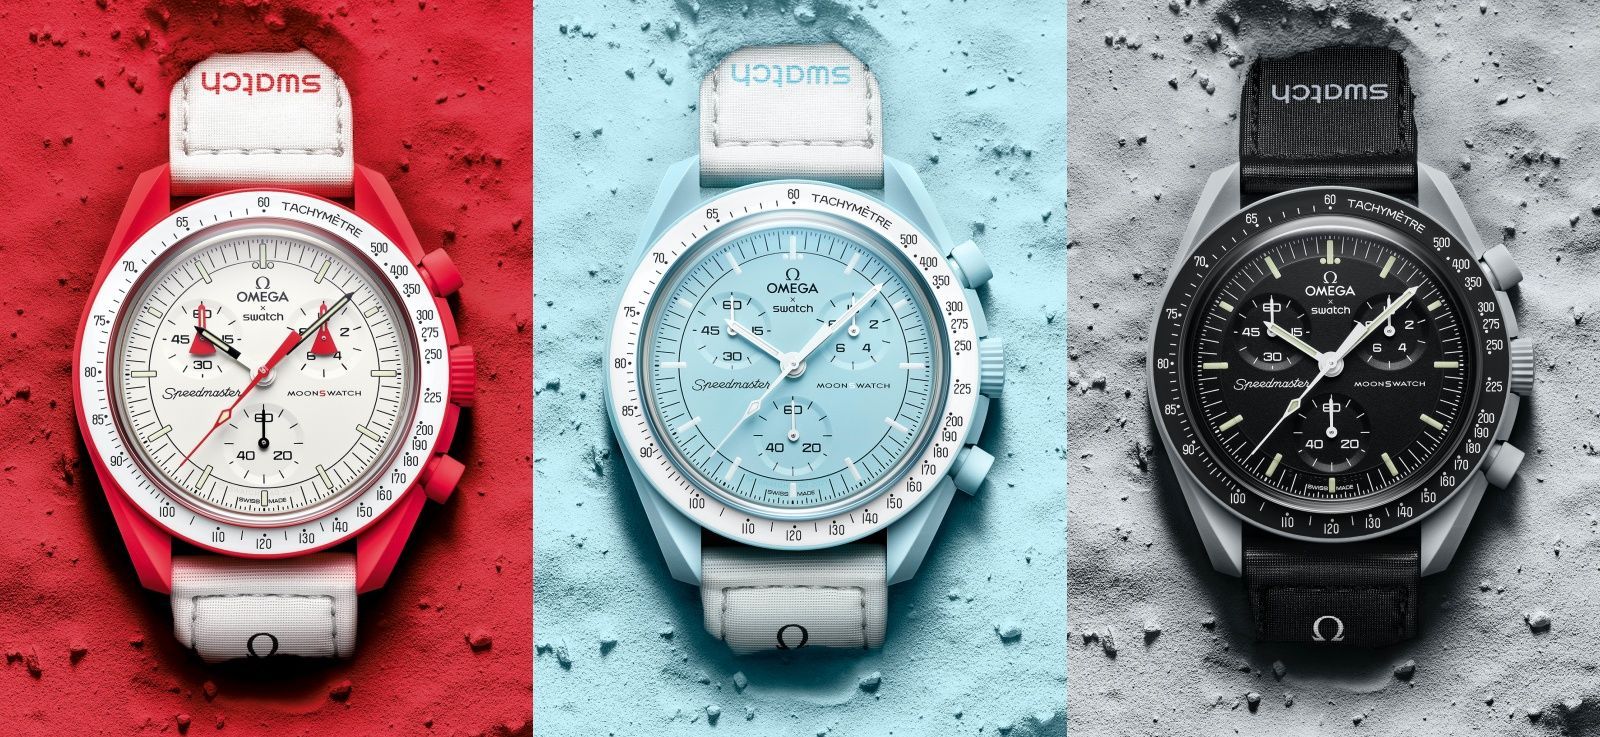 The MoonSwatch: An expert explains whether it's really worth the hype